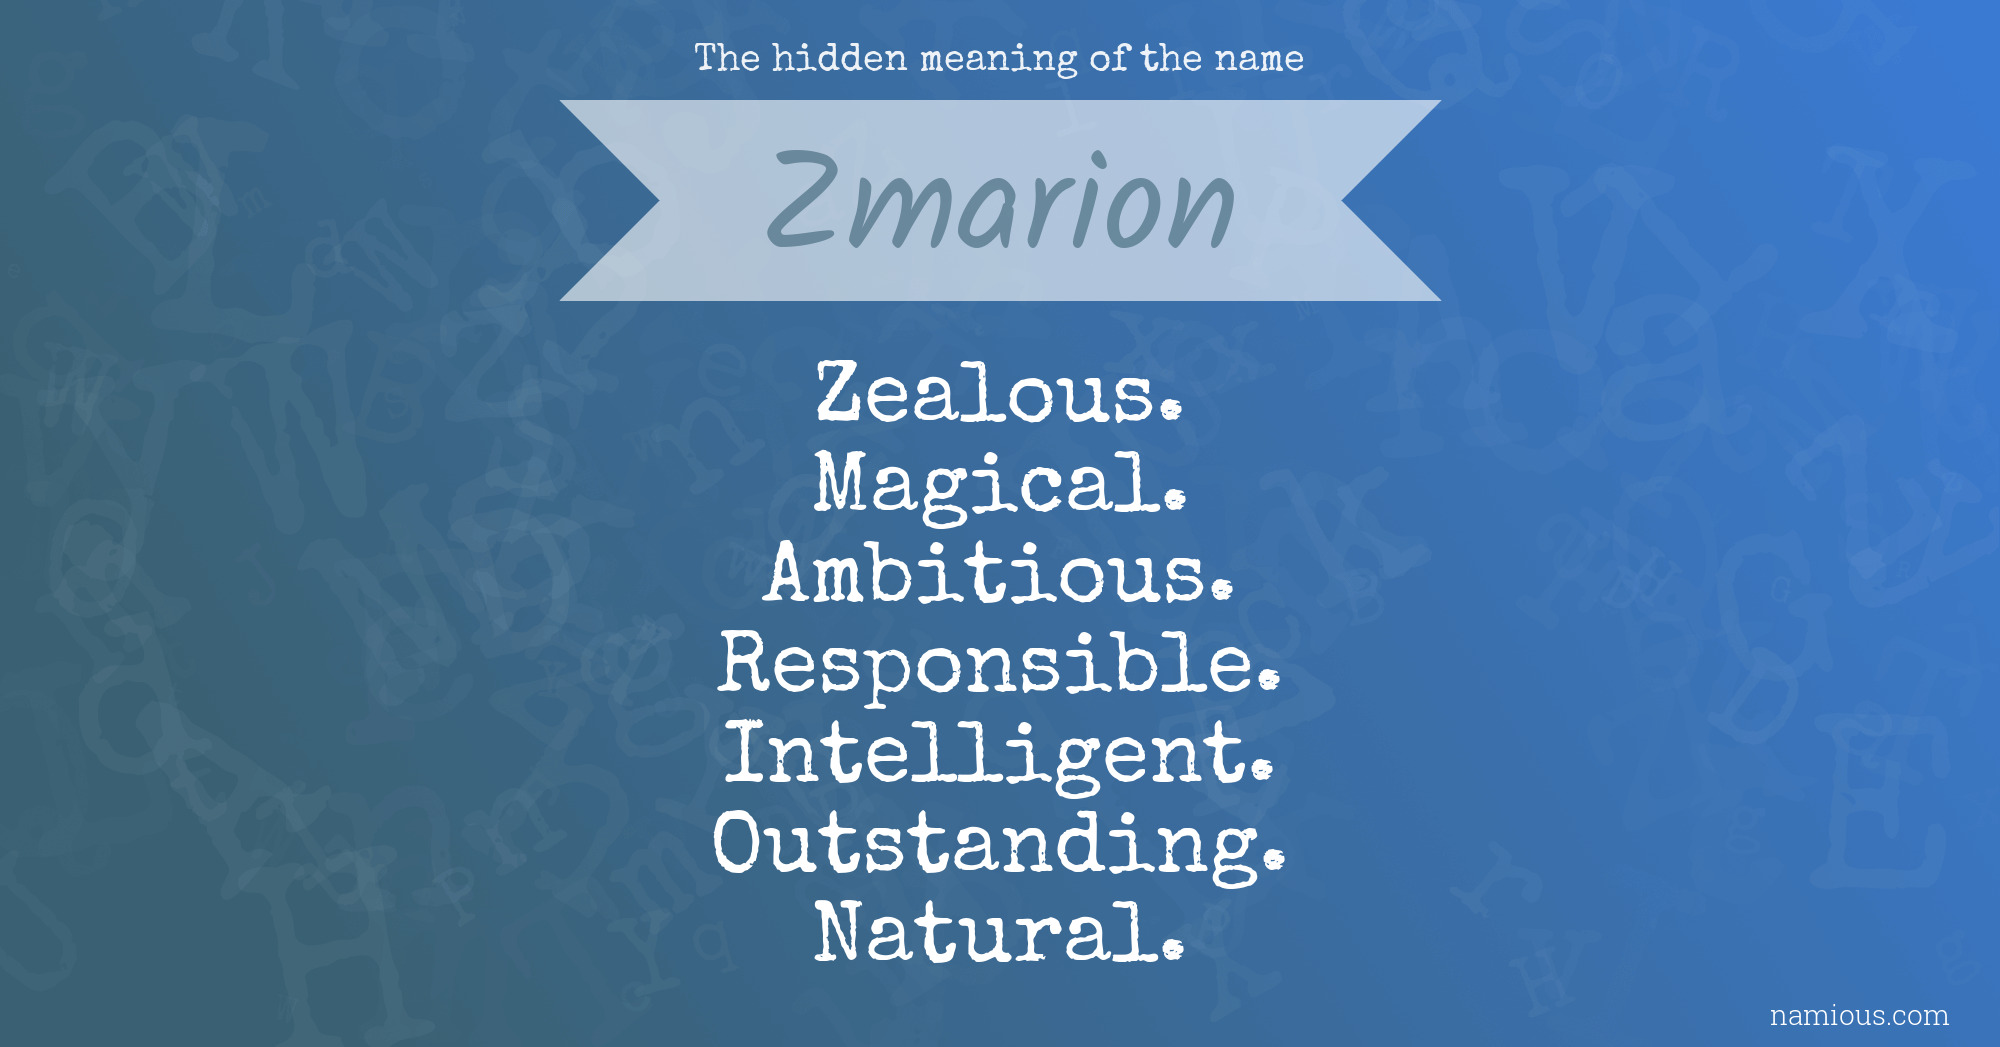 The hidden meaning of the name Zmarion